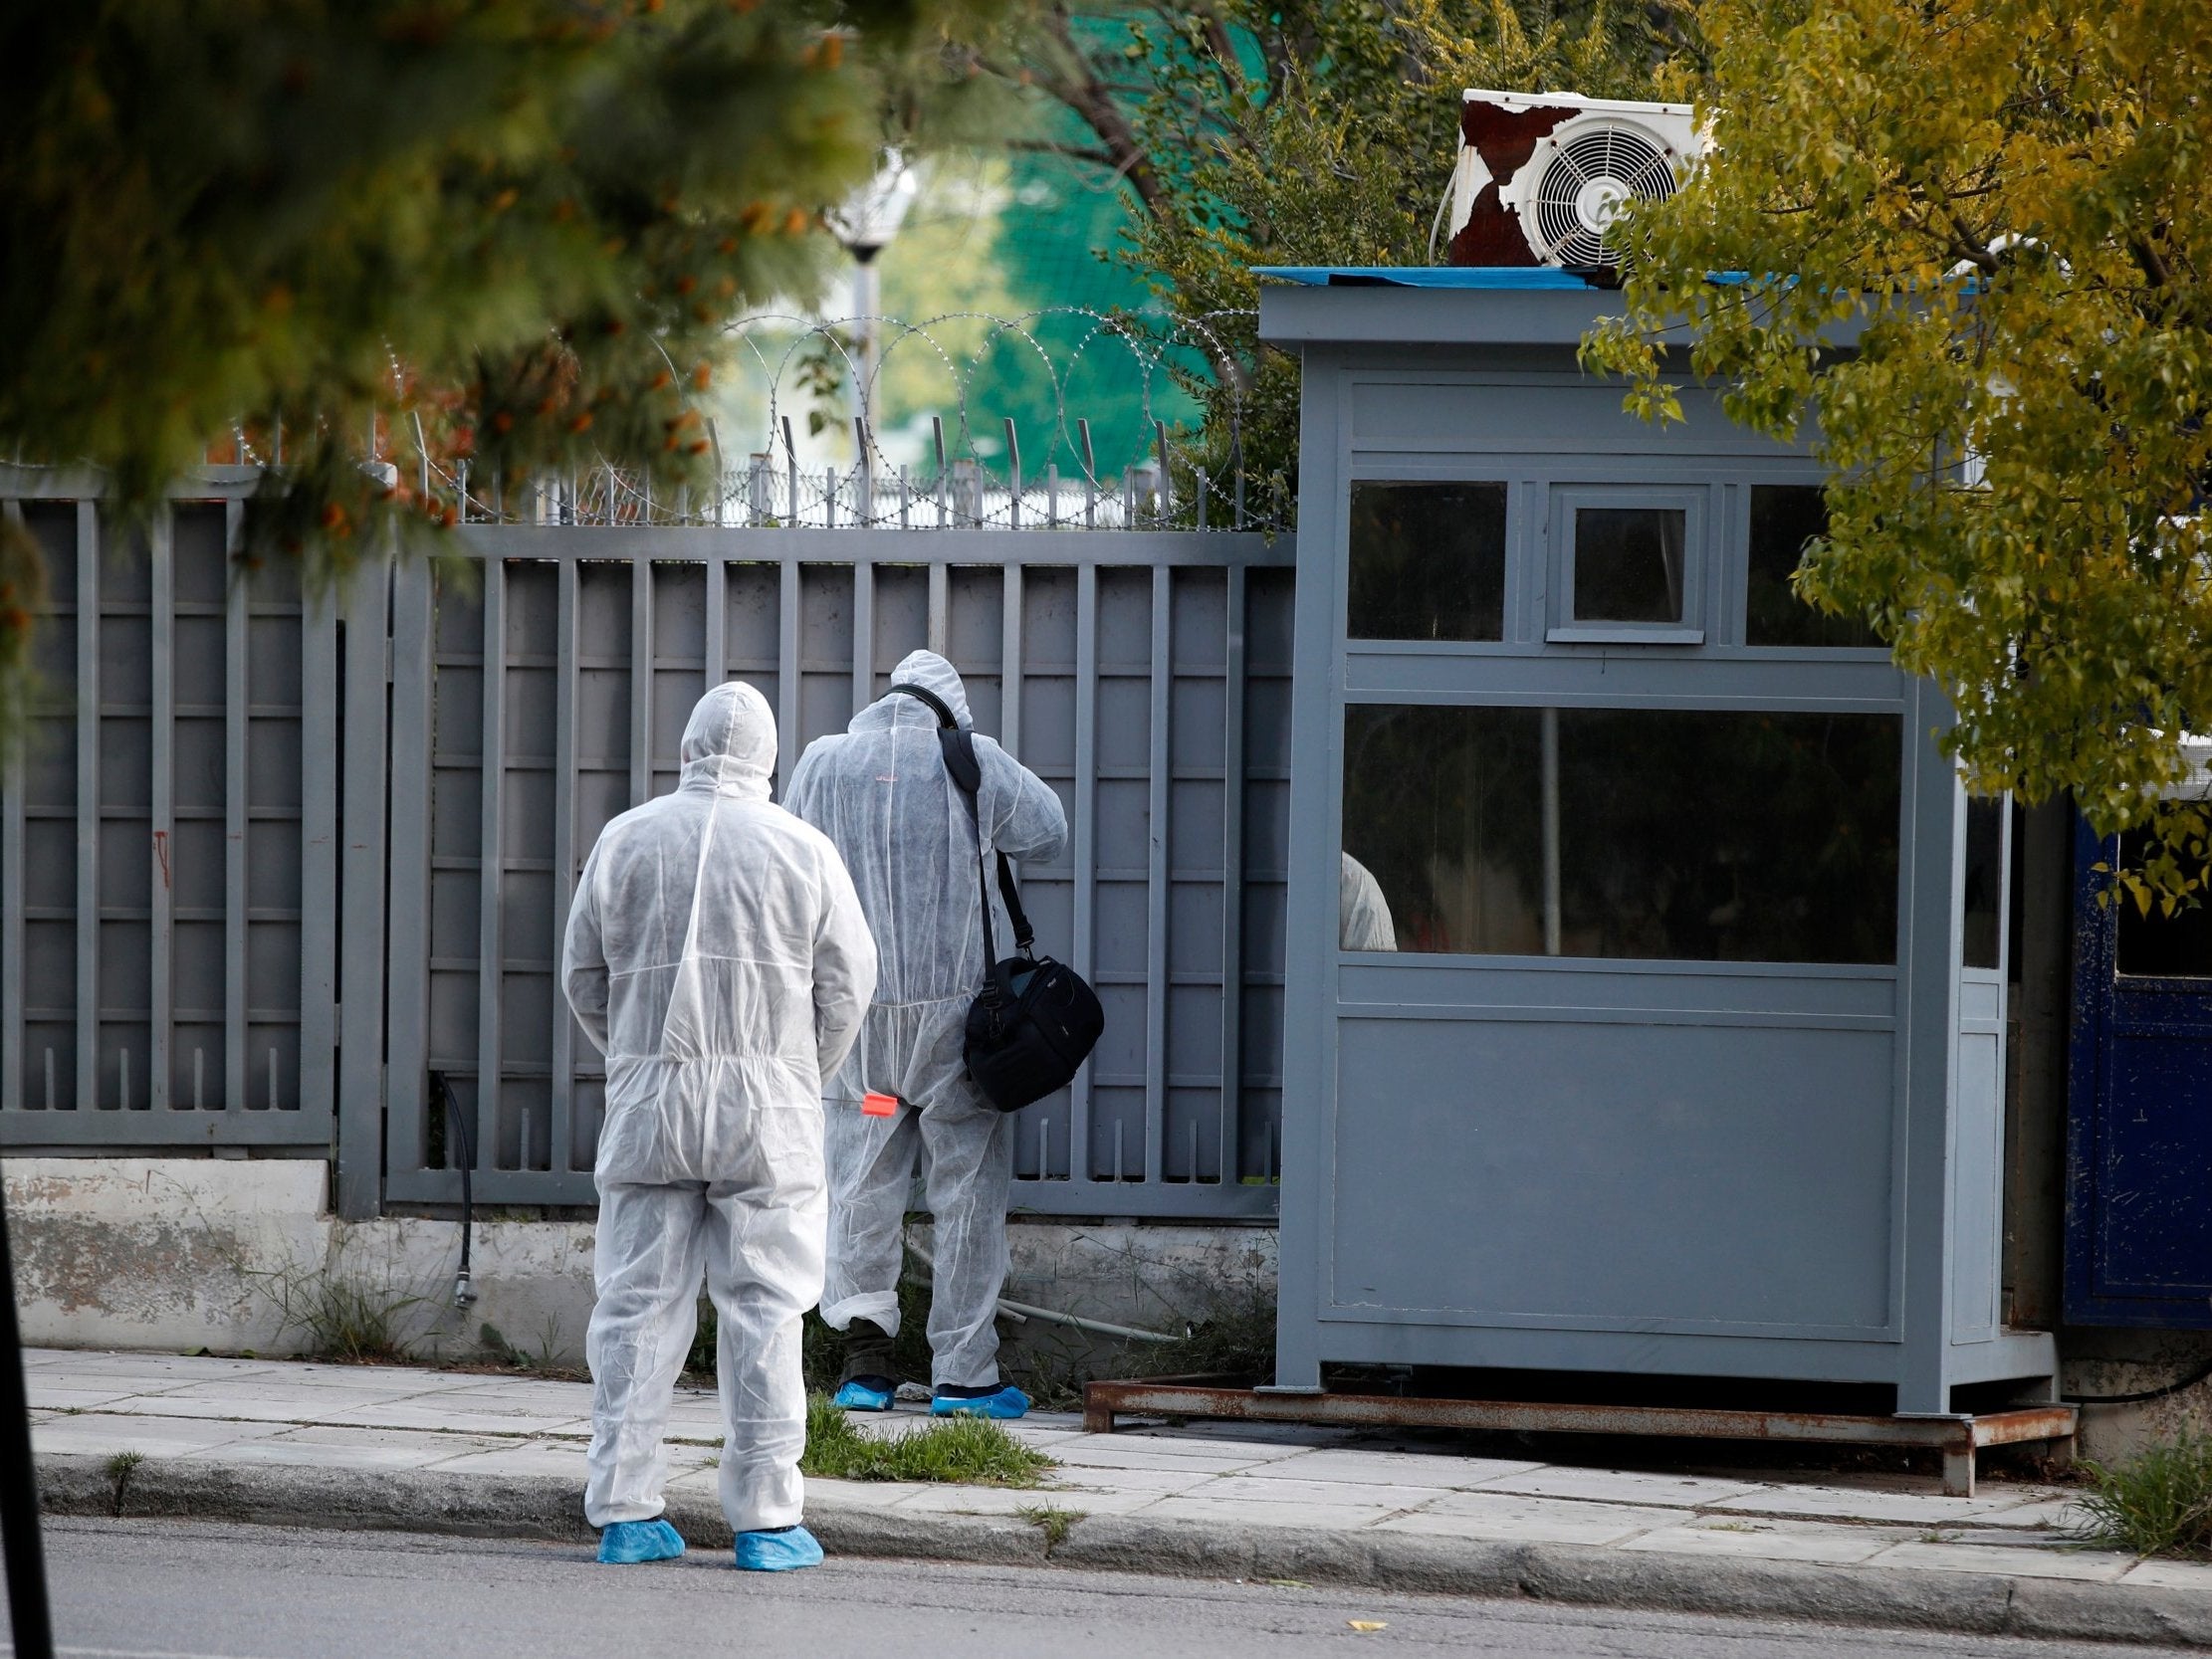 Forensic experts search the area outside the Russian consulate in Athens, Friday 22 March 2019. Police say a bomb disposal squad has been sent to the Russian consulate in Athens after cameras showed a suspicious object believed to be a hand grenade being thrown over the perimeter fence overnight.